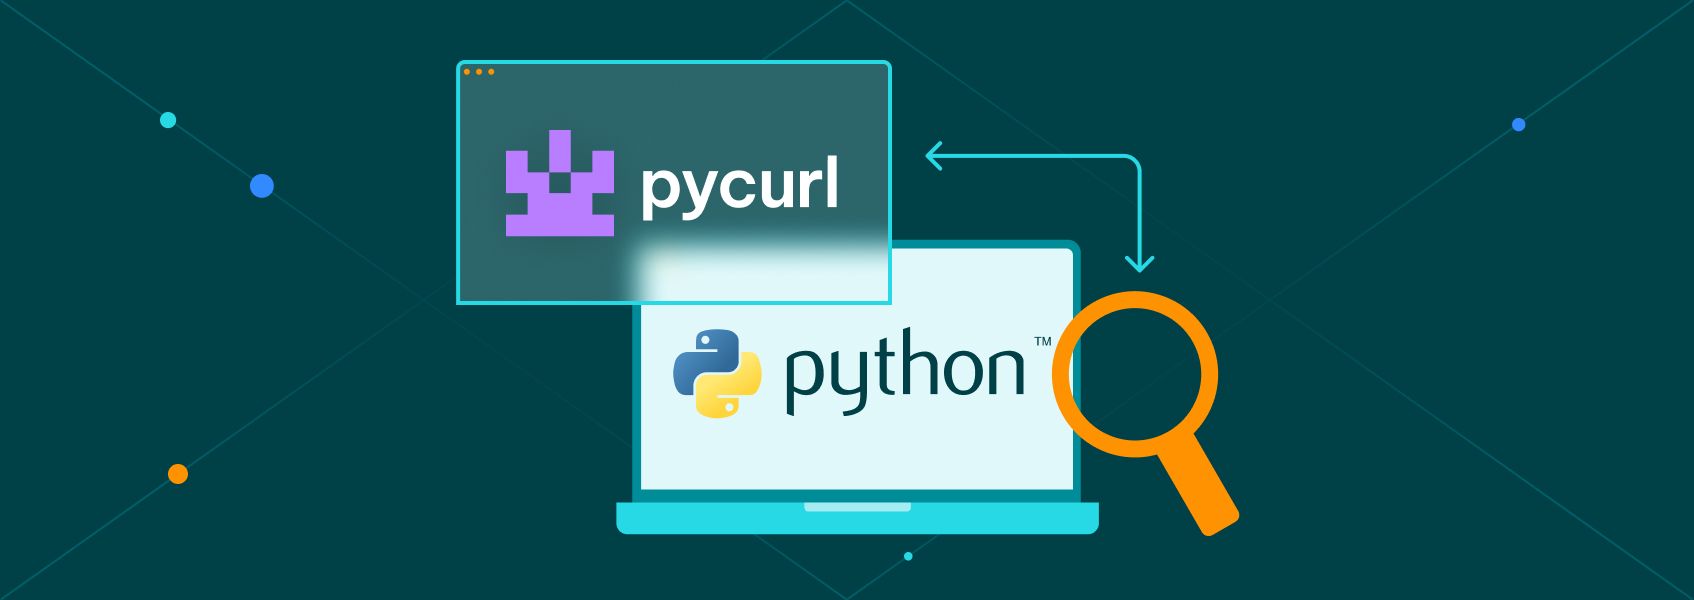 The Python cURL manual - Web scraping with PycURL